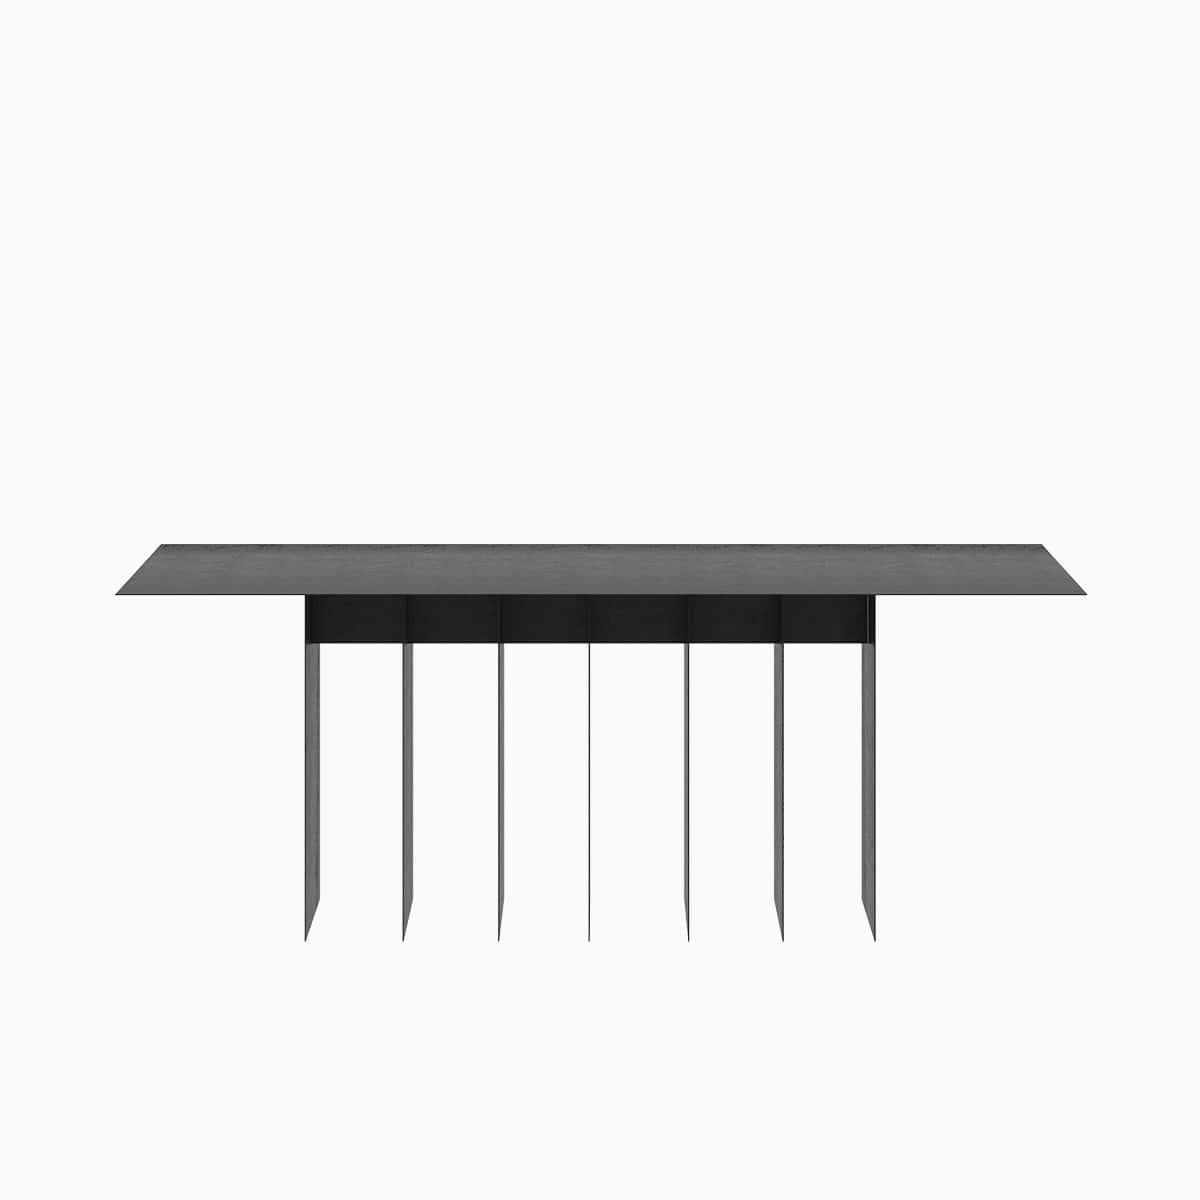 The Staple Dining Table explores repetition and sequence while functioning as a display platform or as a sculpture itself.  
Crafted by hand in galvanized aluminum and coated with a matte electrostatic finish, it was conceptualized to be both, heavy